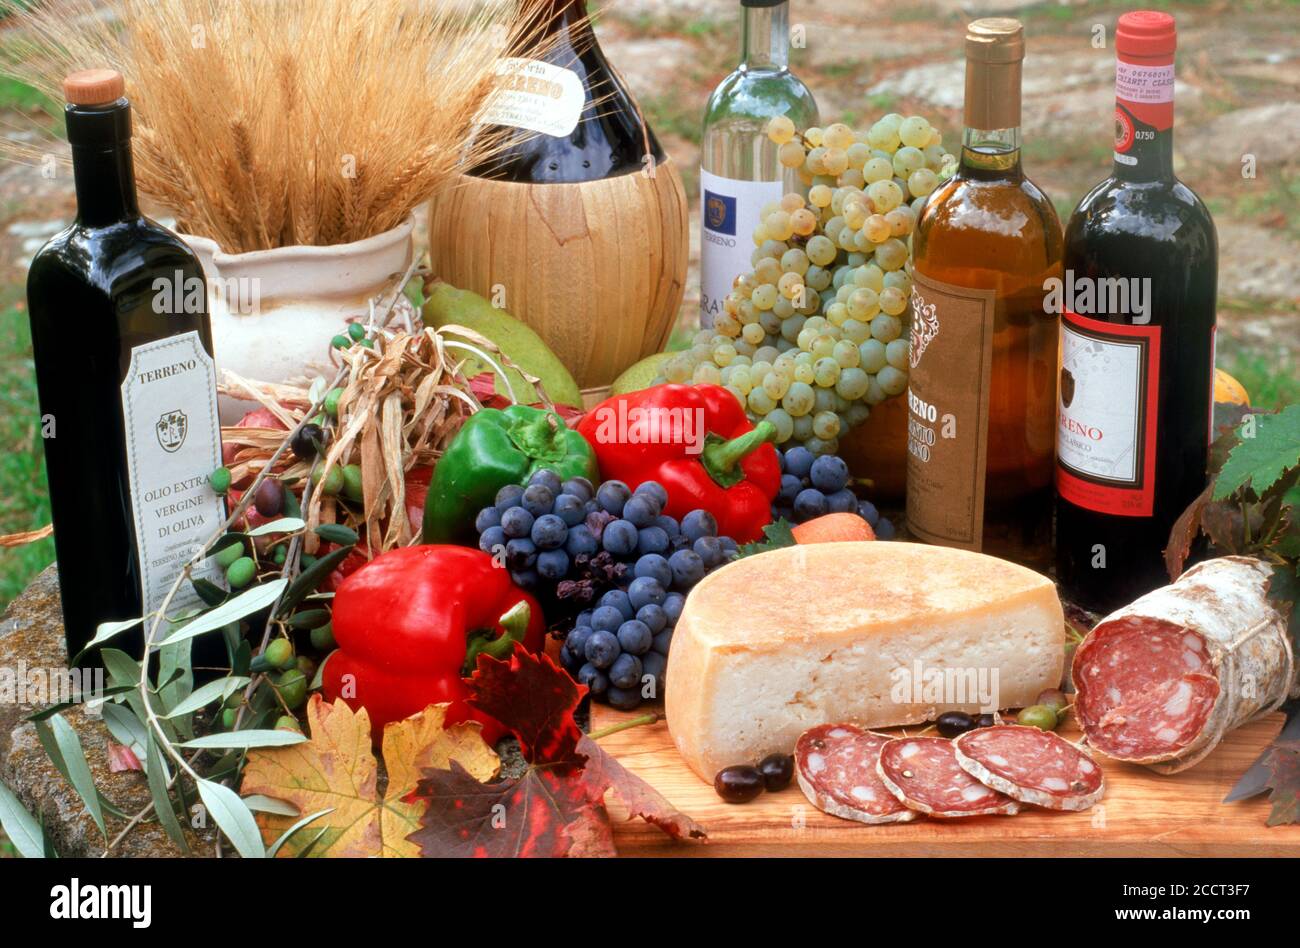 Wine grapes and foods of Chianti region of Tuscany in Italy Stock Photo